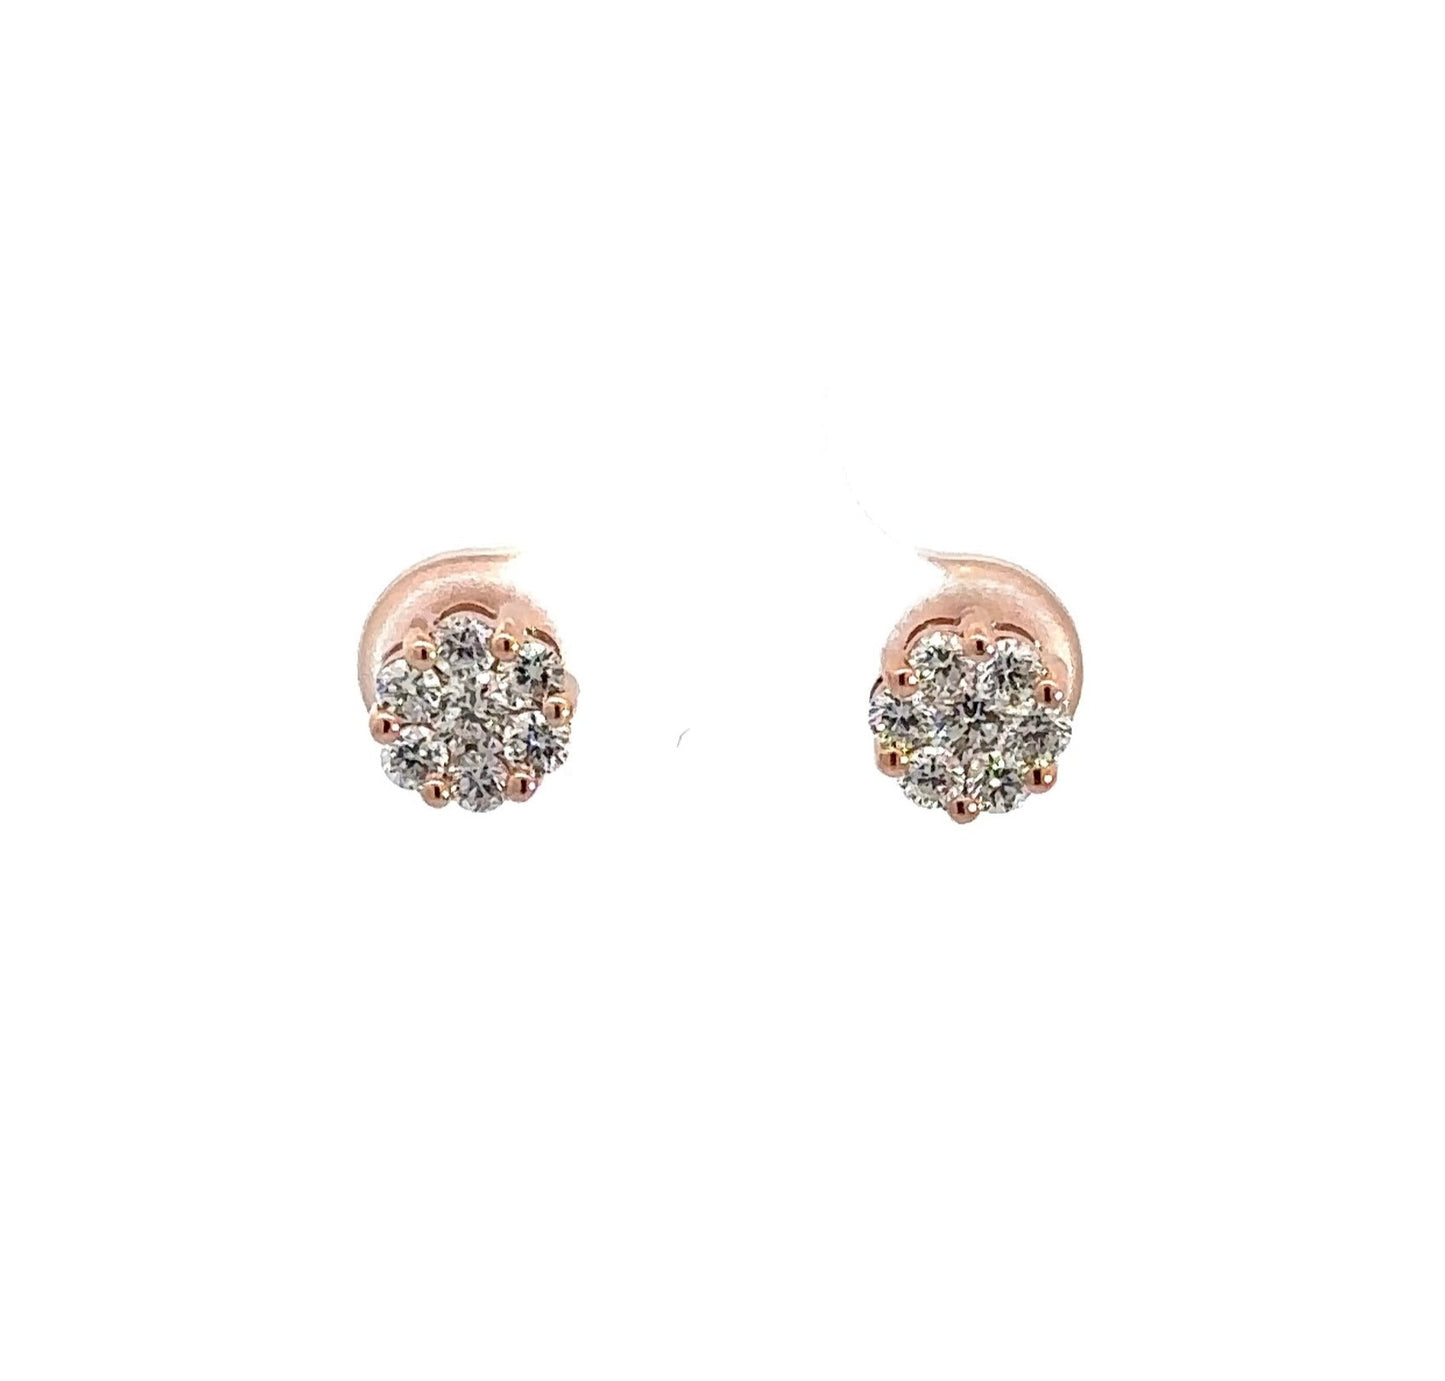 Front of rose gold diamond flower earrings with 7 round diamonds each